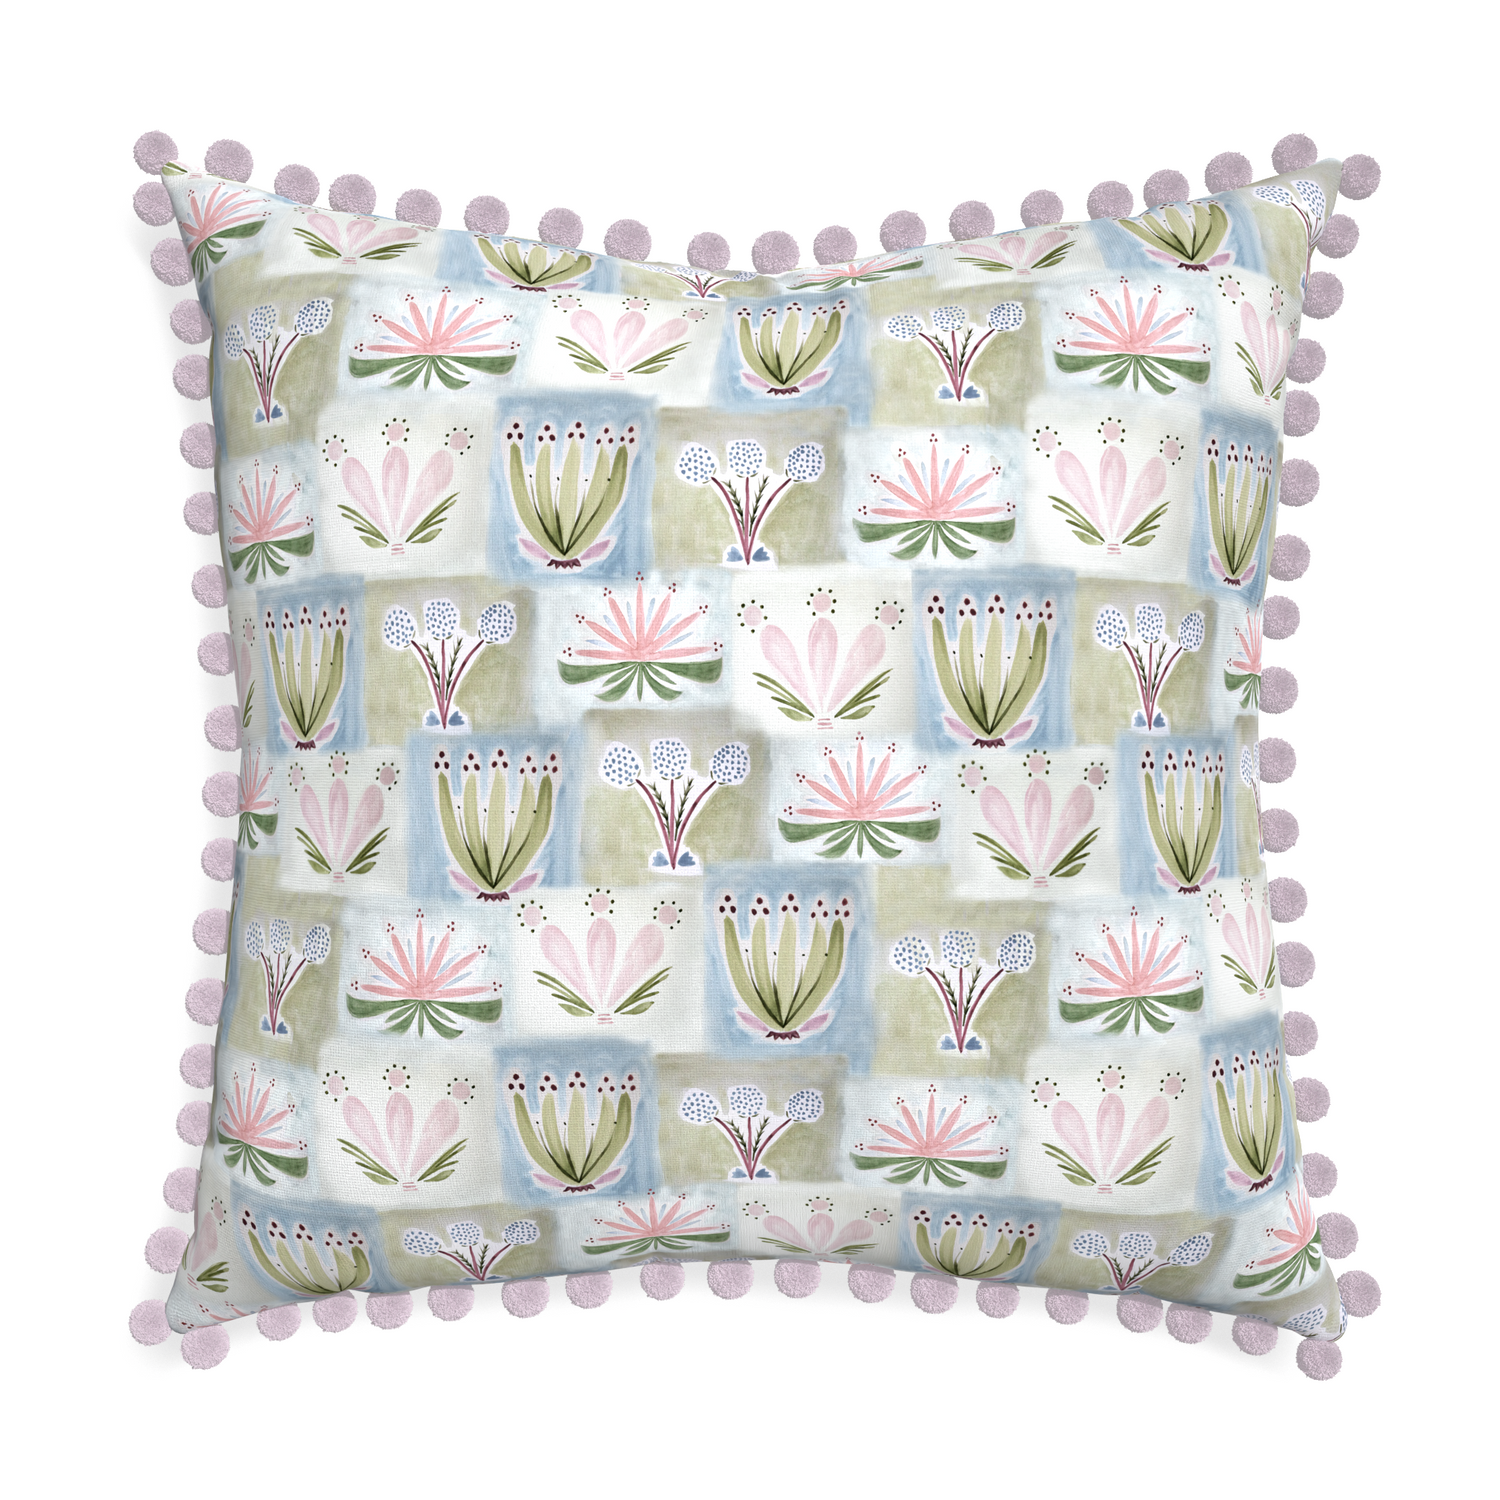 Euro-sham harper custom hand-painted floralpillow with l on white background